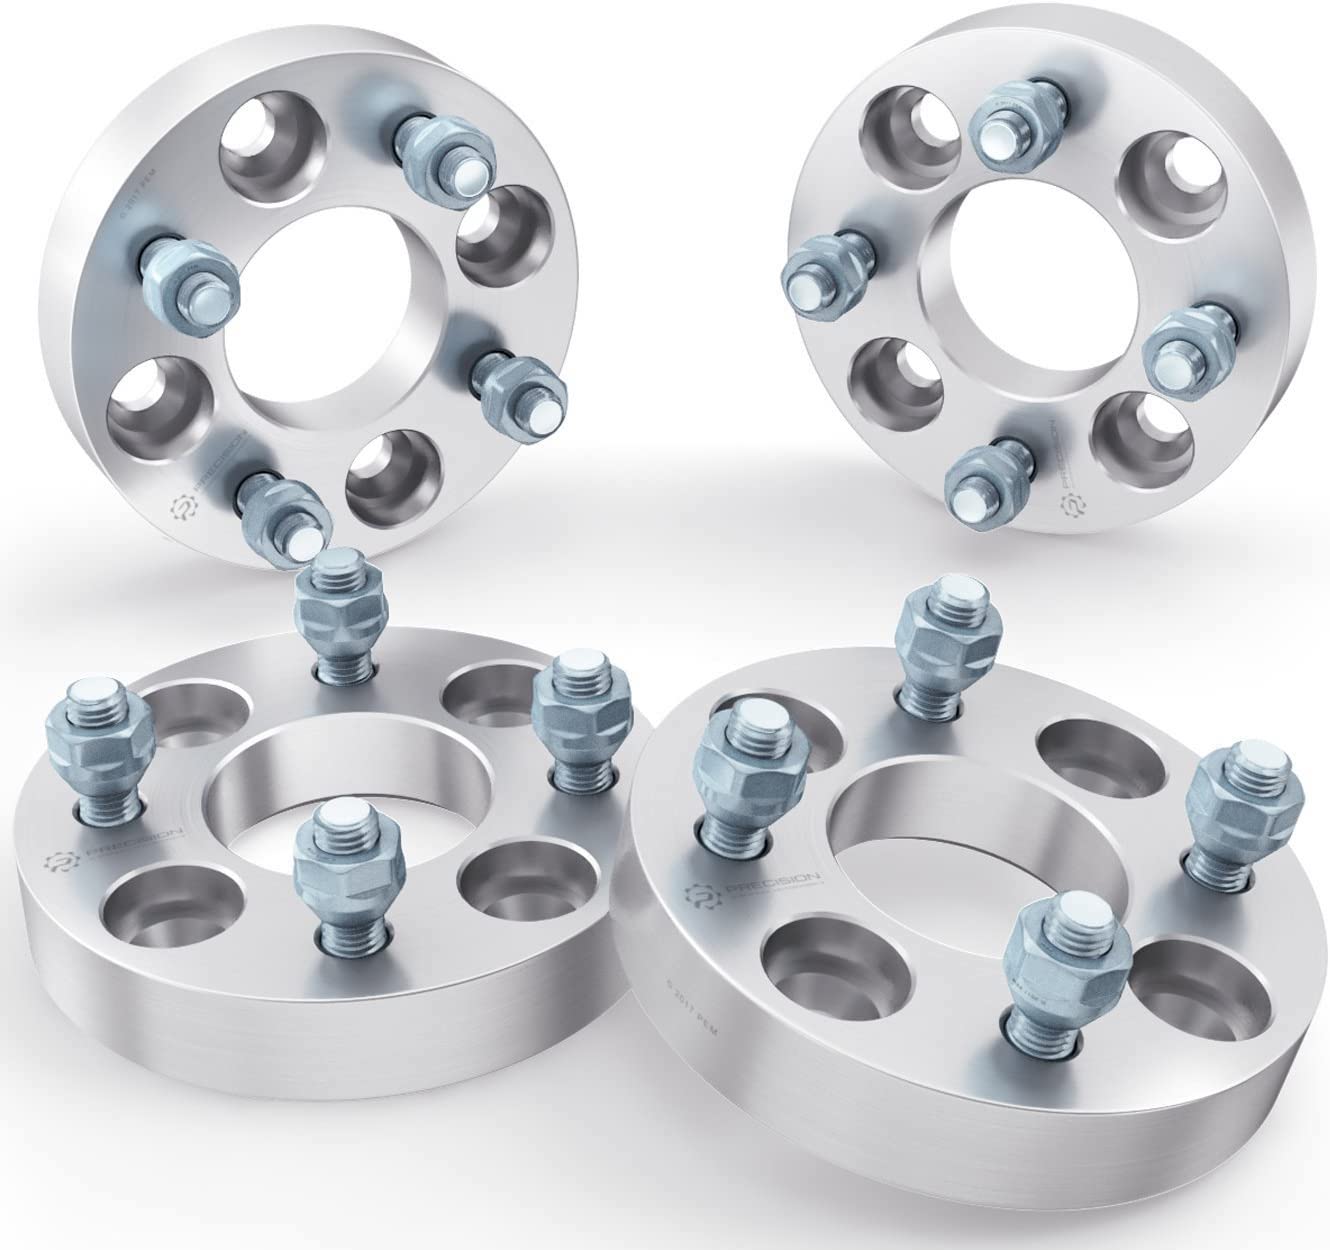 2x Lug Centric Wheel Spacers for 4-Lug Hubs - Bolt On (Thick)